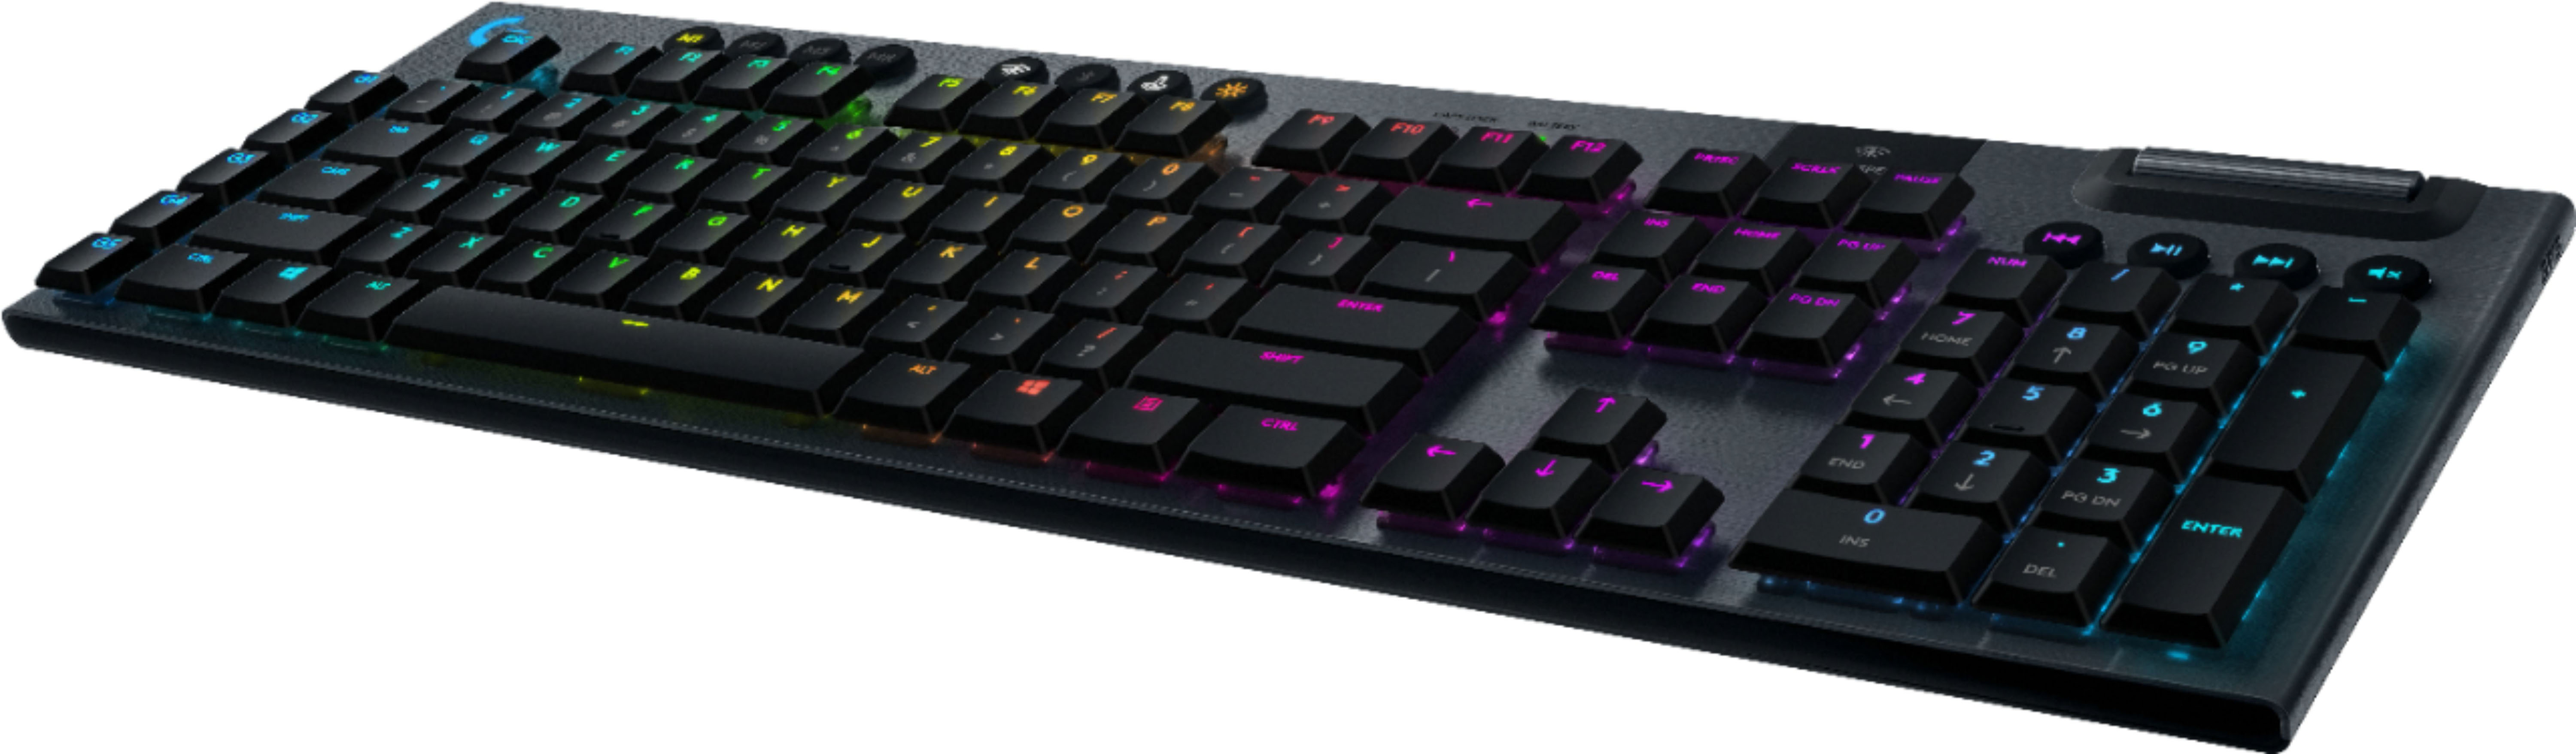 Left View: Logitech - G915 LIGHTSPEED Full-size Wireless Mechanical GL Linear Switch Gaming Keyboard with RGB Backlighting - Black